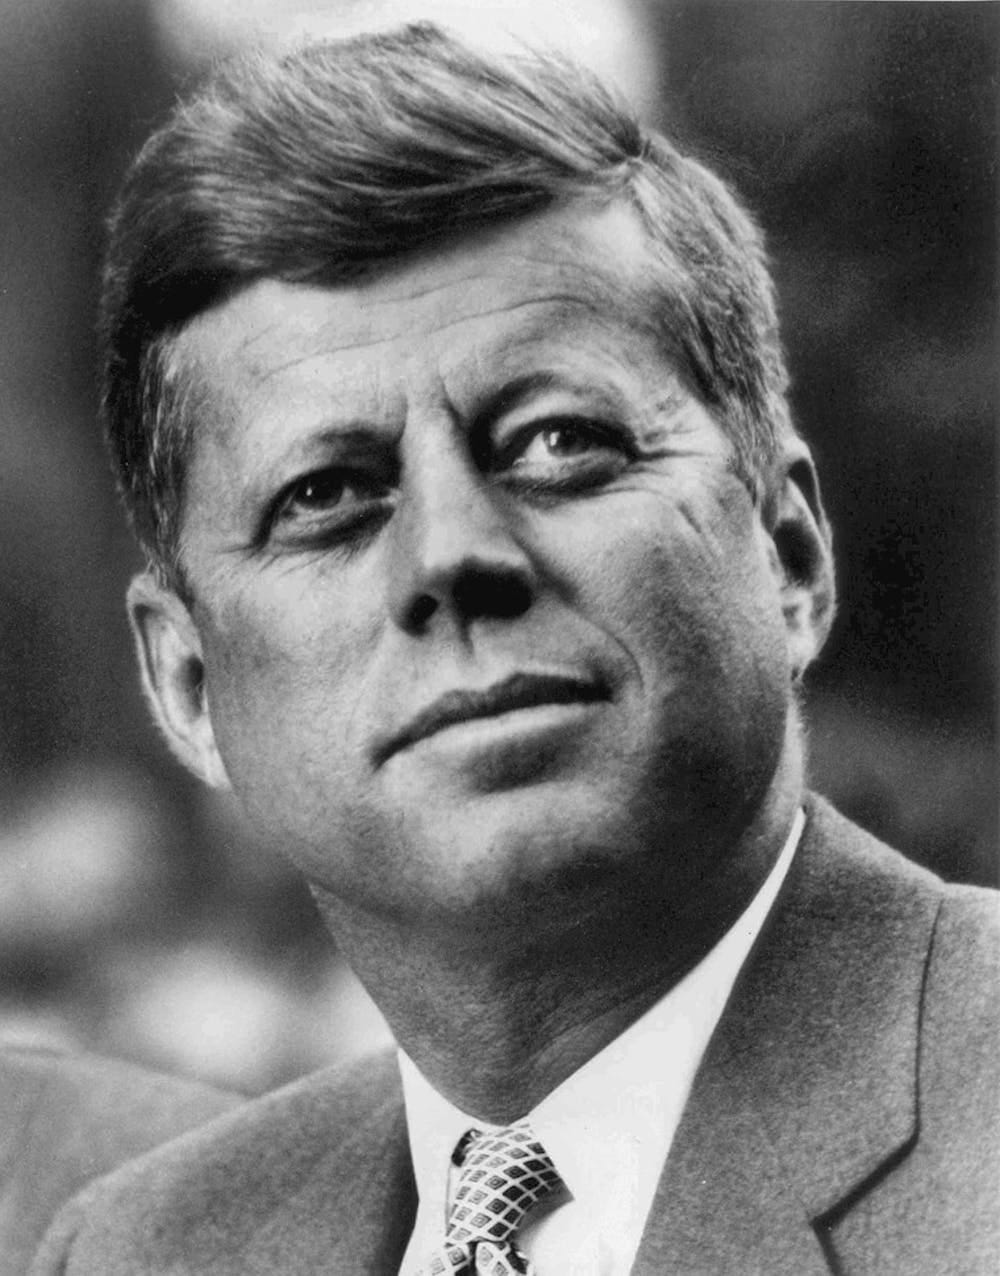 Mathematical oddities in memory of President John F. Kennedy - The Beacon